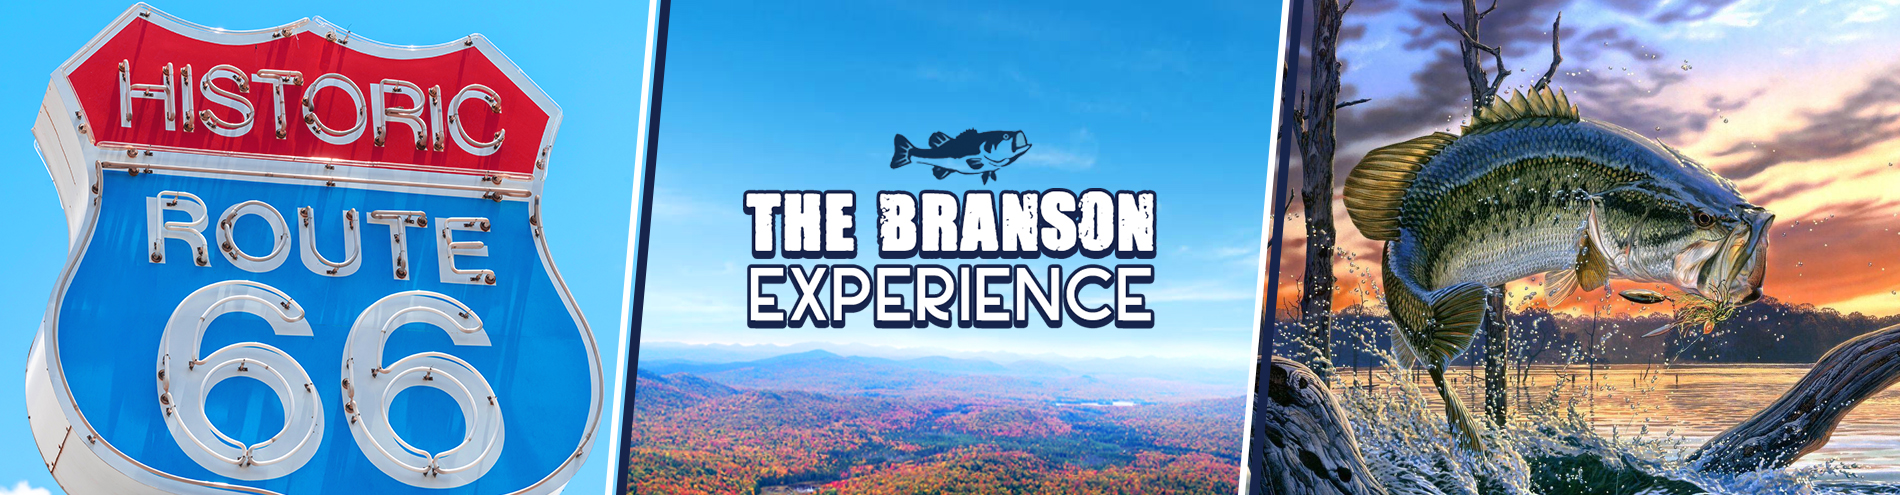 The Branson Experience Header